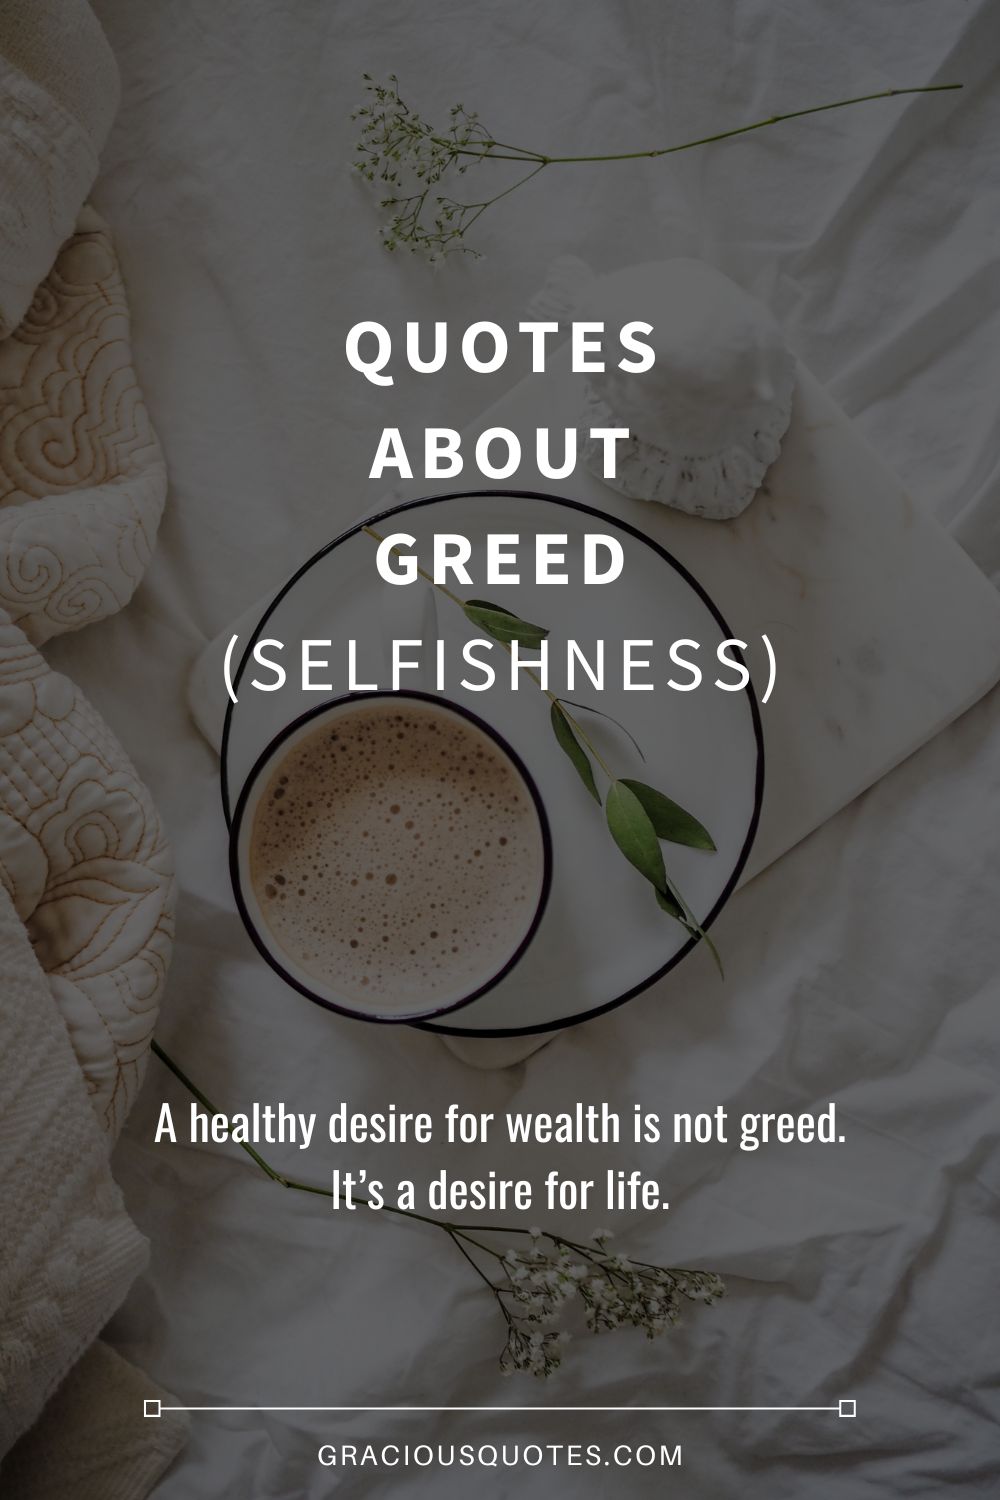 Quotes About Greed (SELFISHNESS) - Gracious Quotes